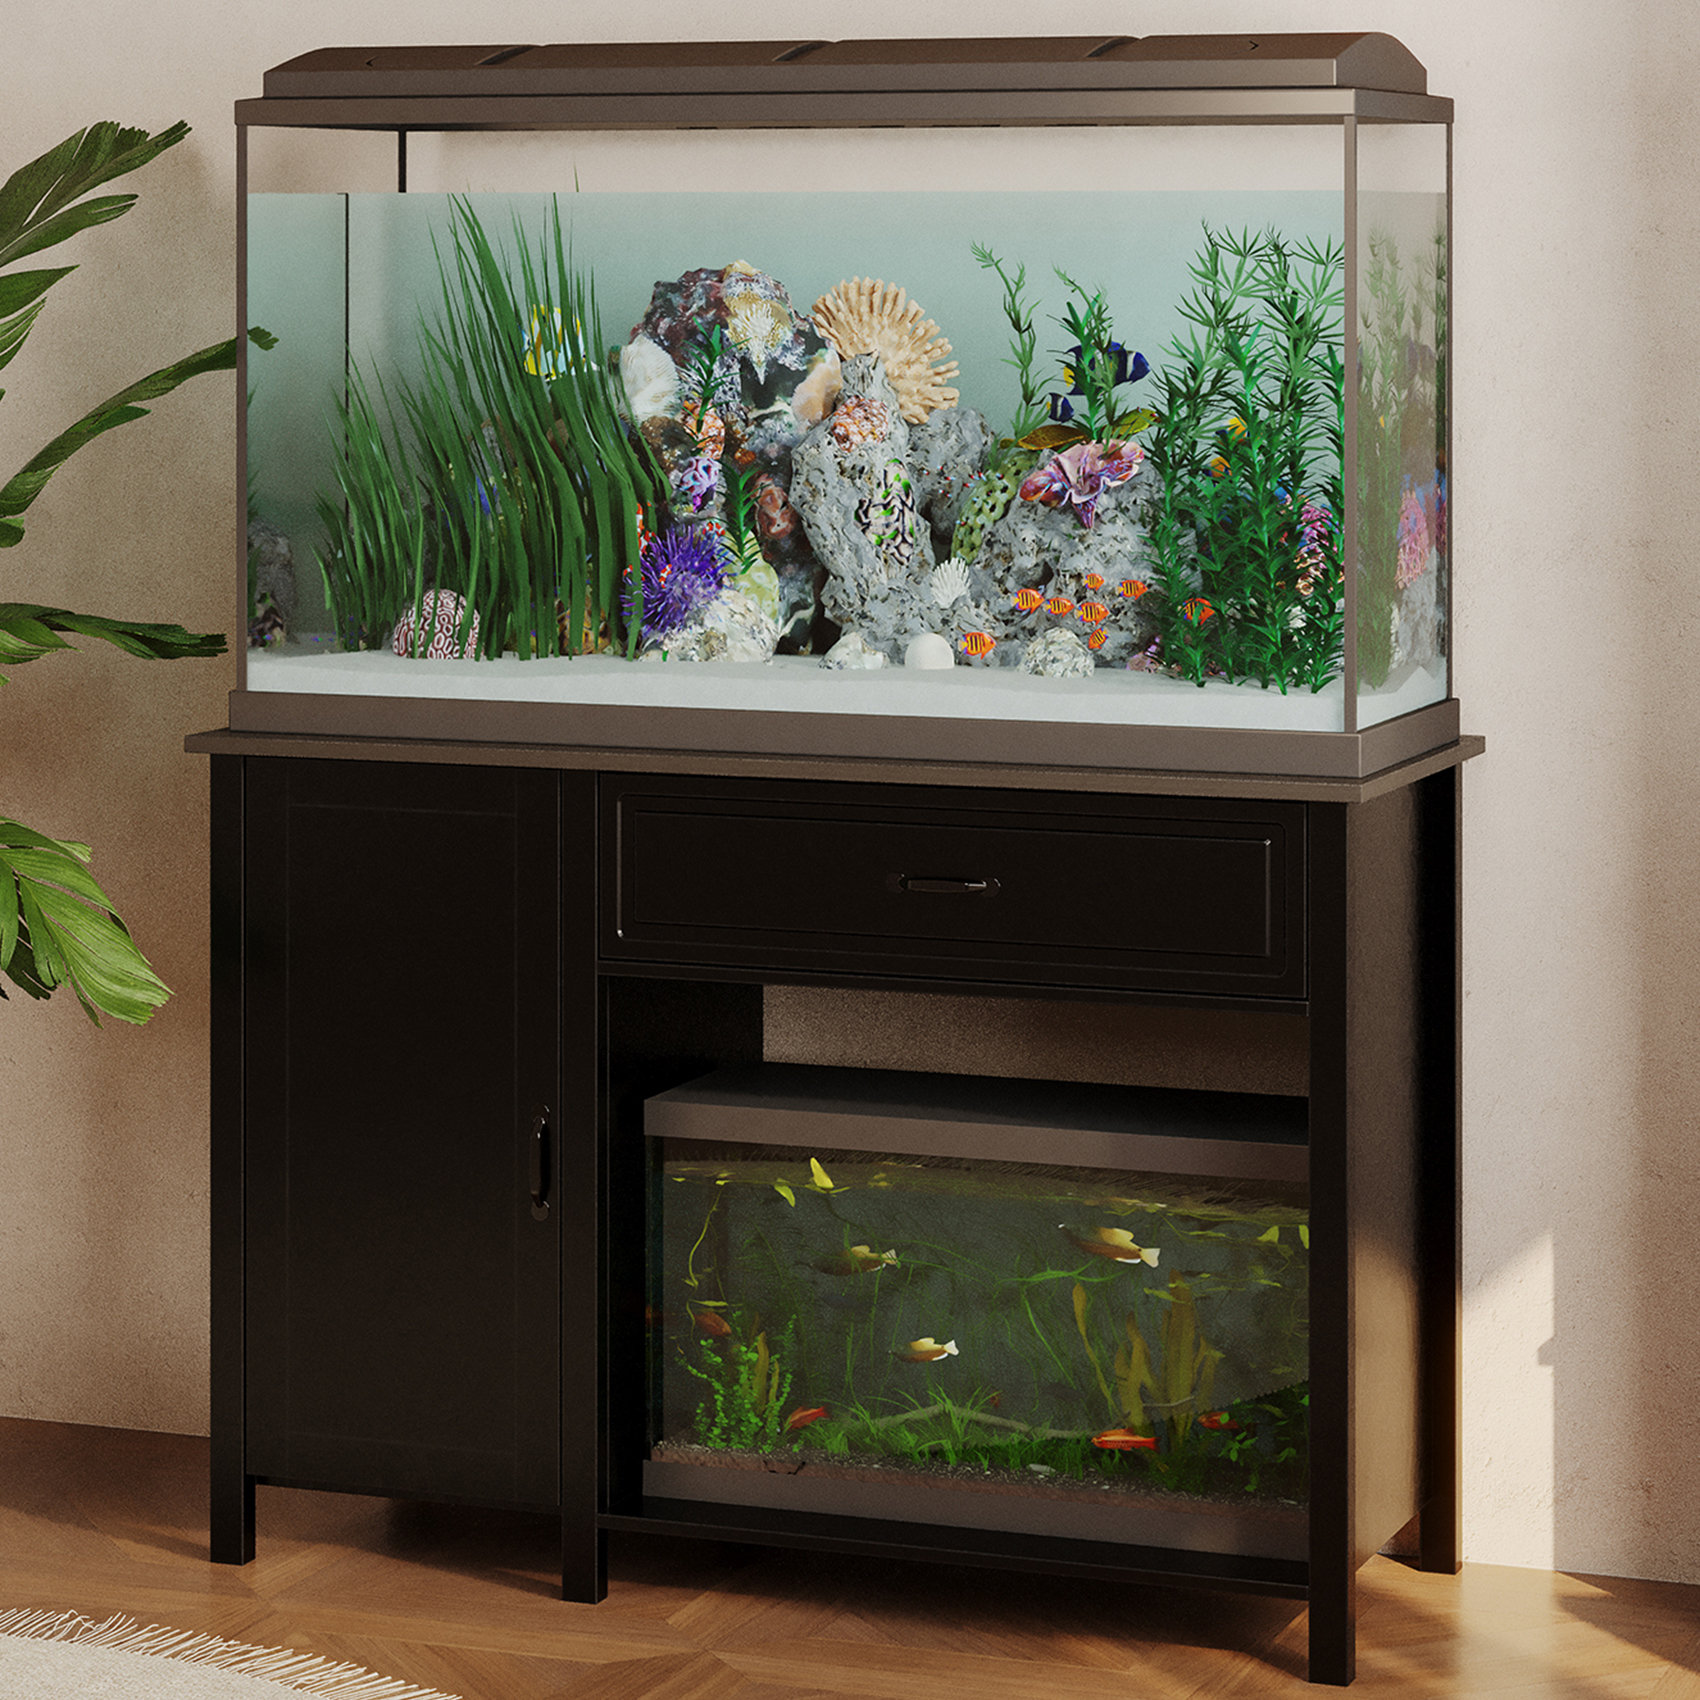 MOWPEX Fish Tank Stand - Heavy Duty Wooden 55-75 Gallon With Storage  Cabinet For Fish Tank Accessories - 770 LBS Capacity